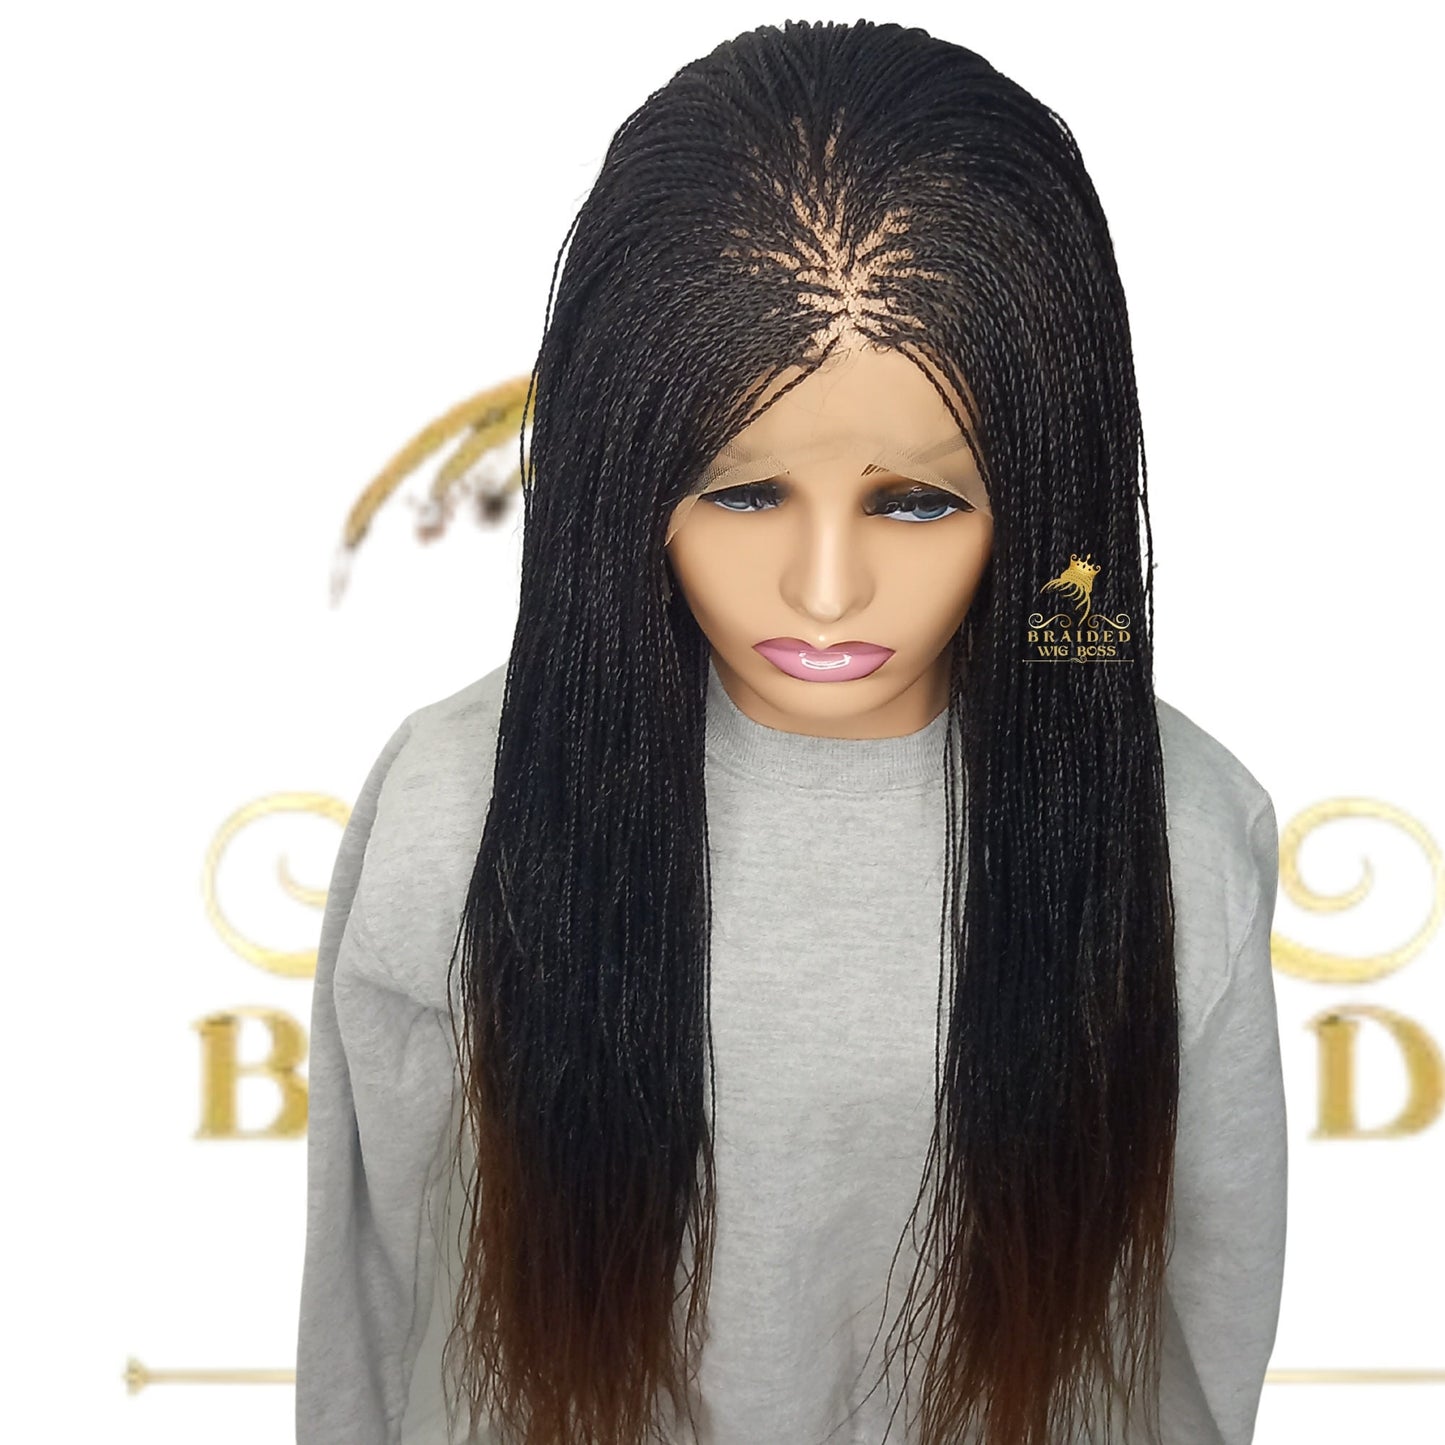 Ombre Micro Million Braids Braided Wig on Full Lace Wig for Black Women 30 Inches, Million Braided Wig with Twist